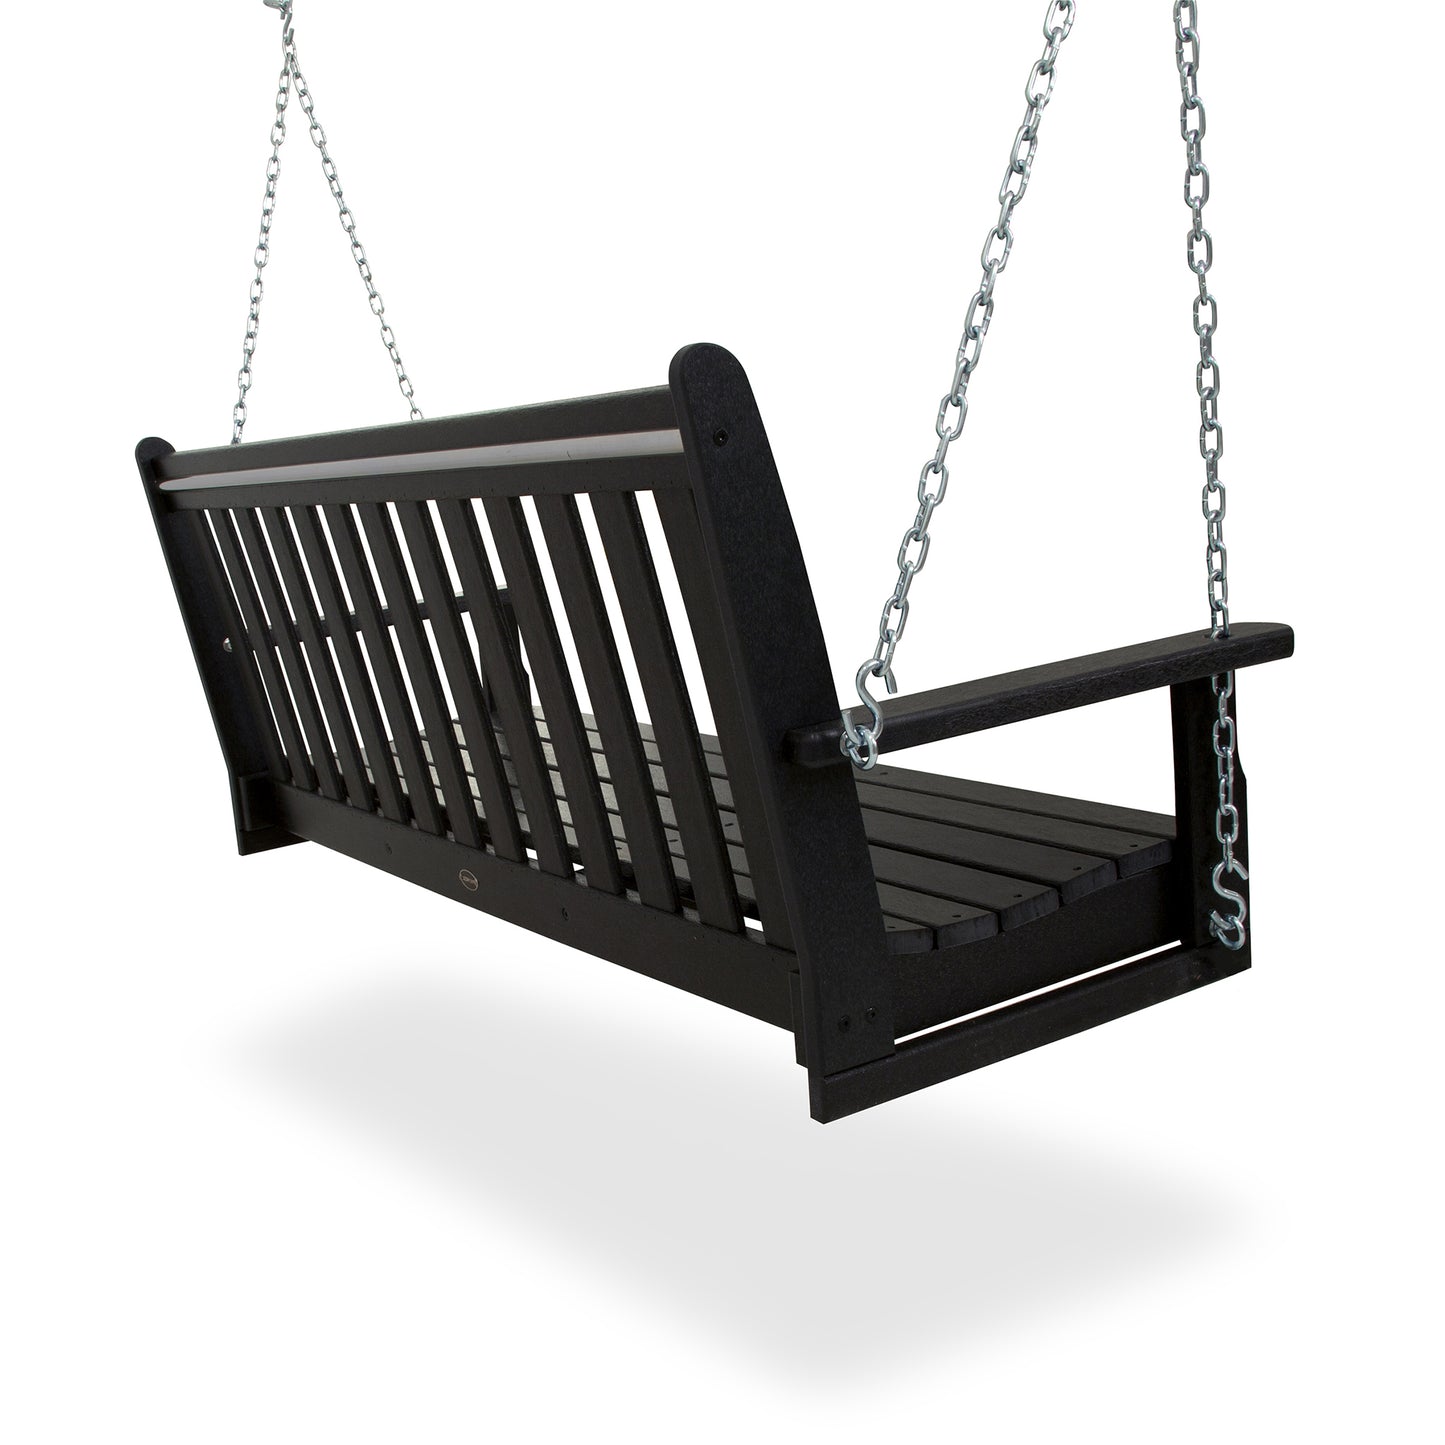 A black POLYWOOD® Vineyard 60" porch swing suspended by chains on a white background. The swing features a slatted seat and back, with sturdy armrests, designed for outdoor use.